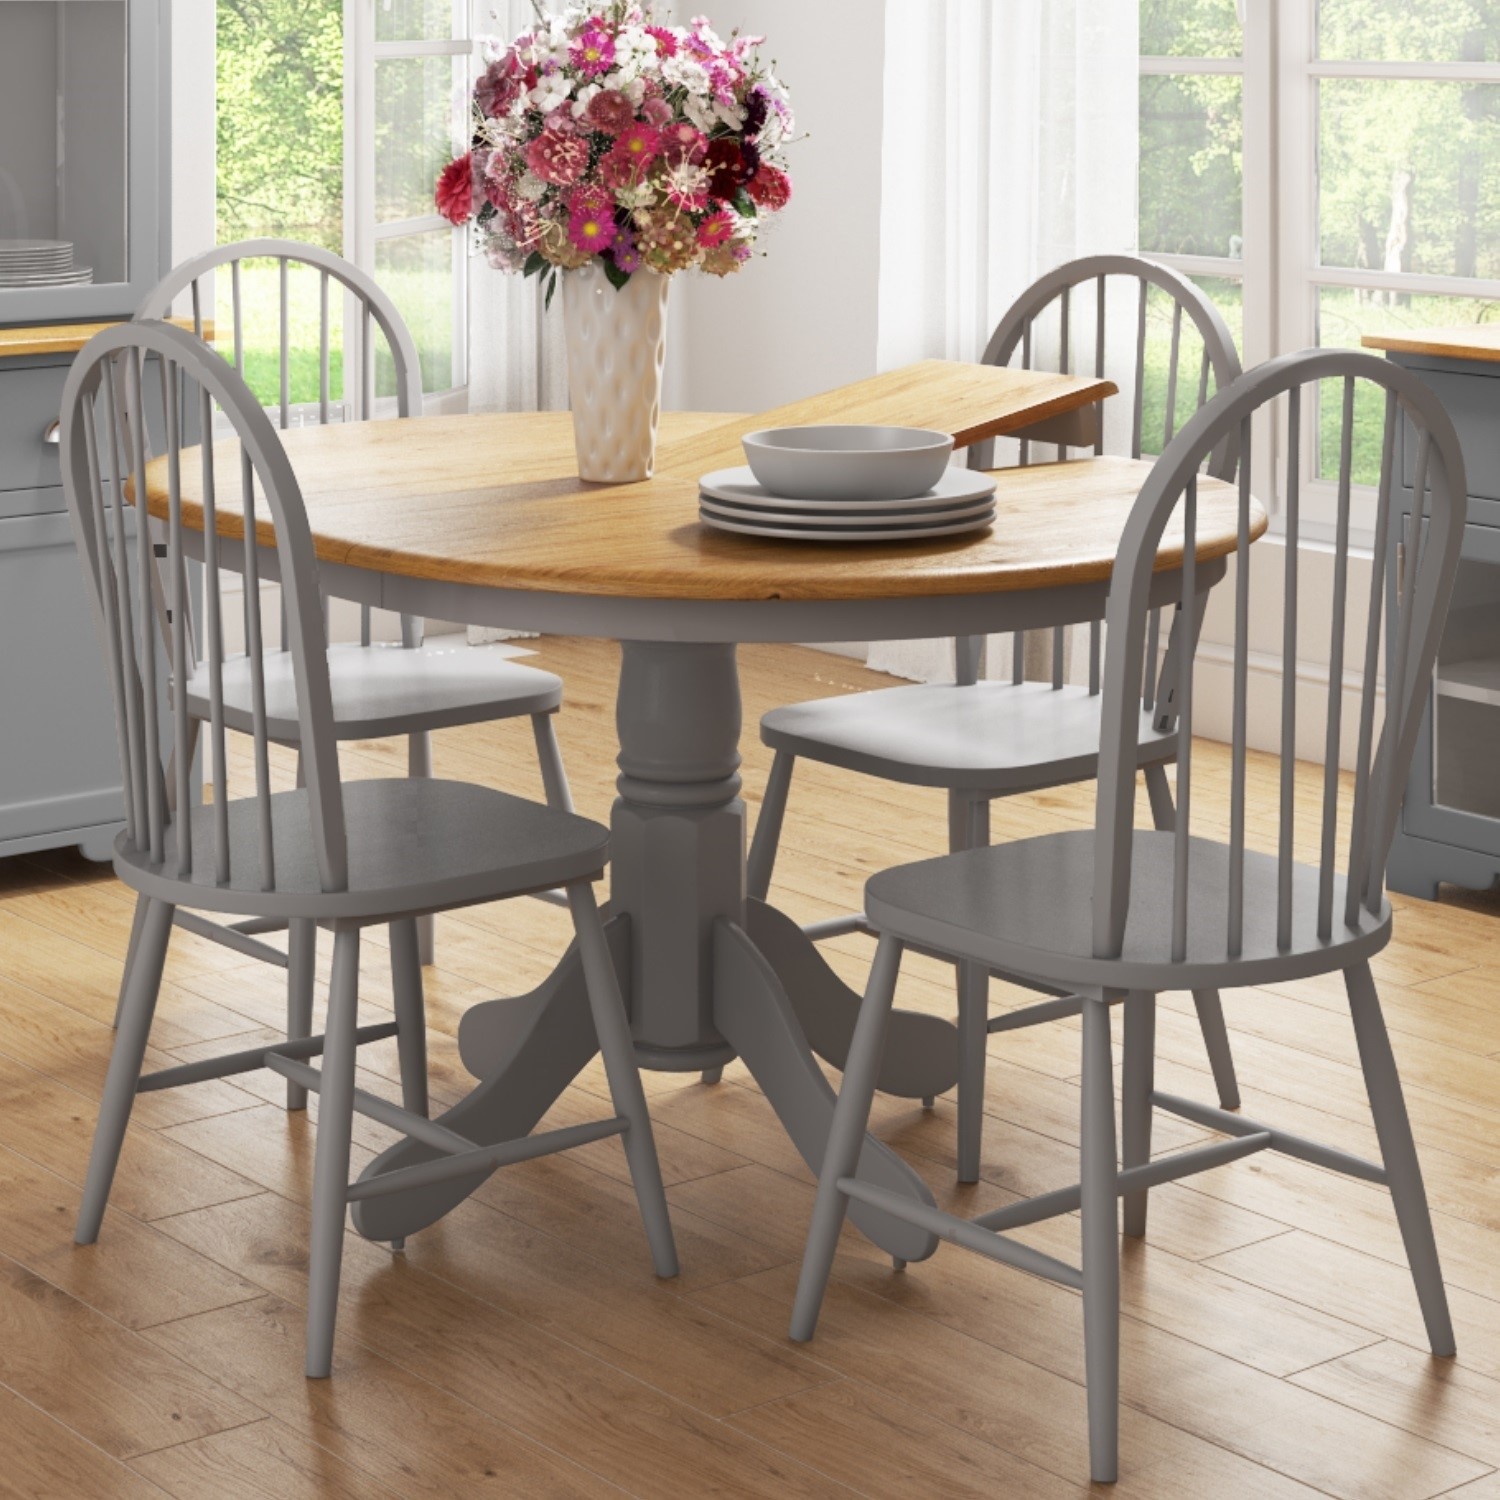 Round Extendable Dining Table Set With 4 Grey Wooden Dining Chairs Rhode Island Furniture123